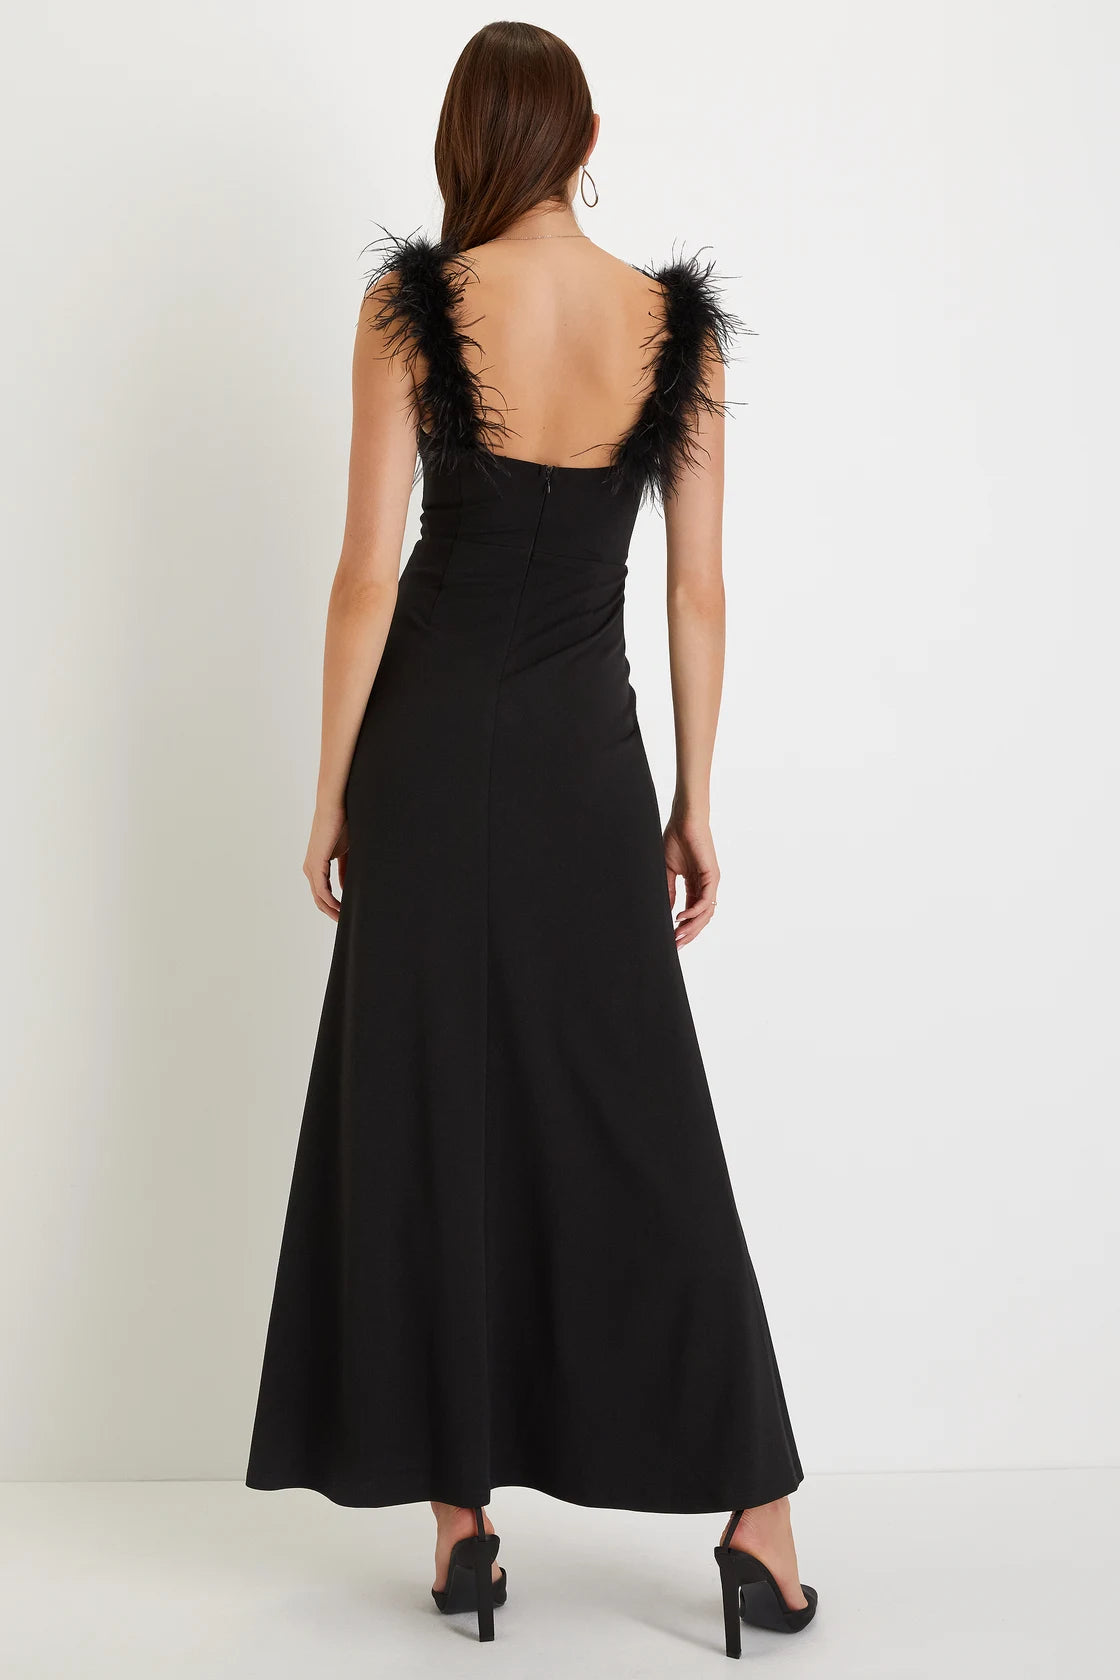 Back view of the Lulus Glamorous Impression Feather Strap Mermaid Maxi Dress in the color Black